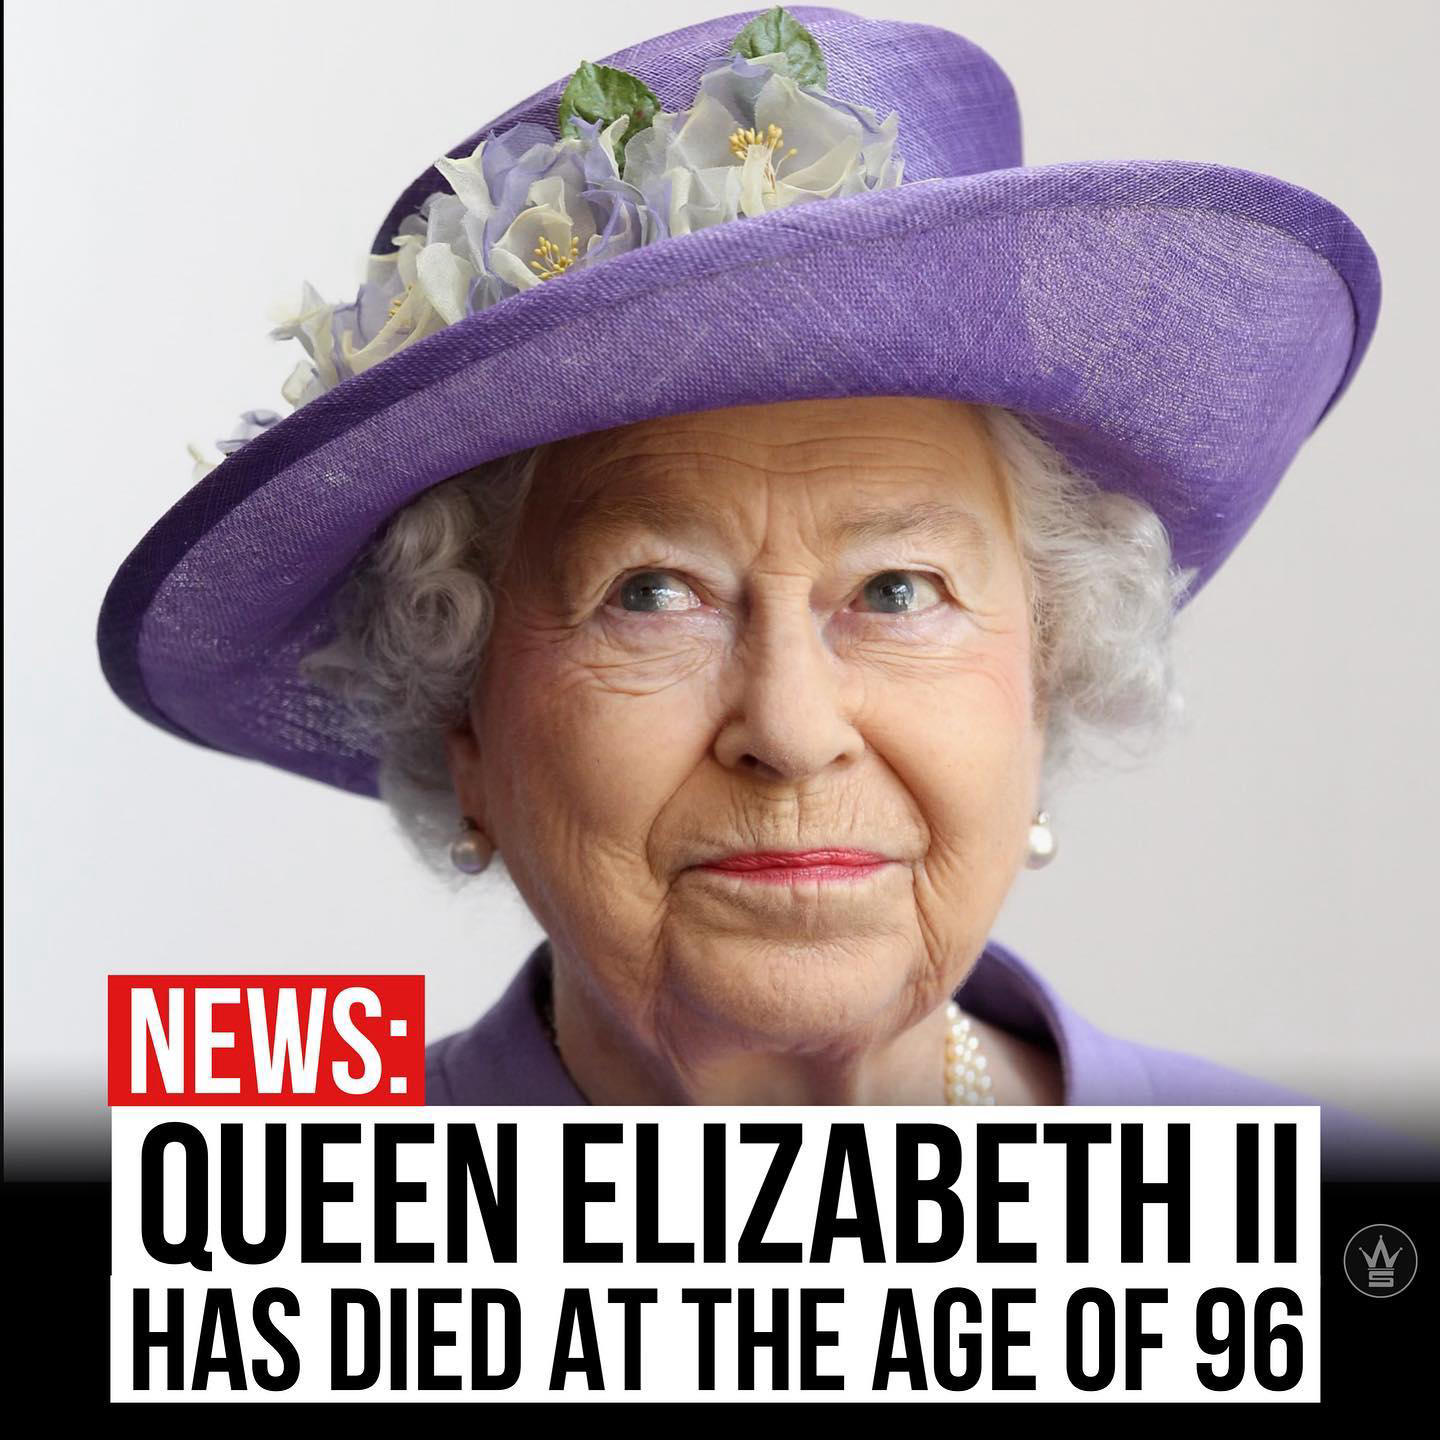 WorldStar Hip Hop / WSHH - According to reports, Queen Elizabeth II has died at the age of 96 after